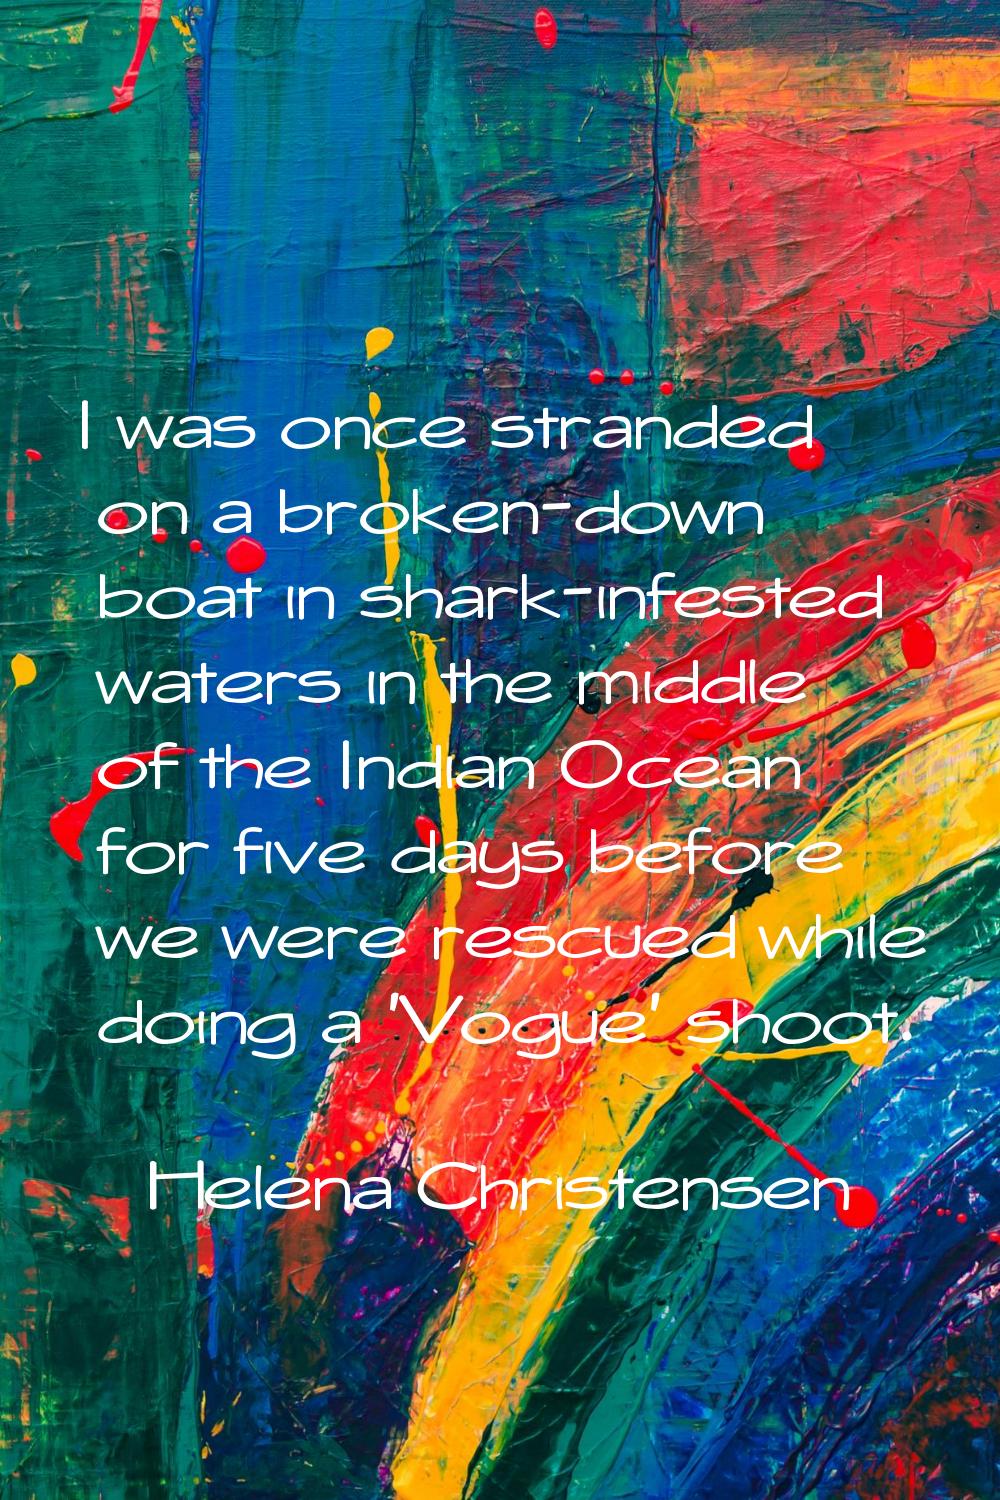 I was once stranded on a broken-down boat in shark-infested waters in the middle of the Indian Ocea